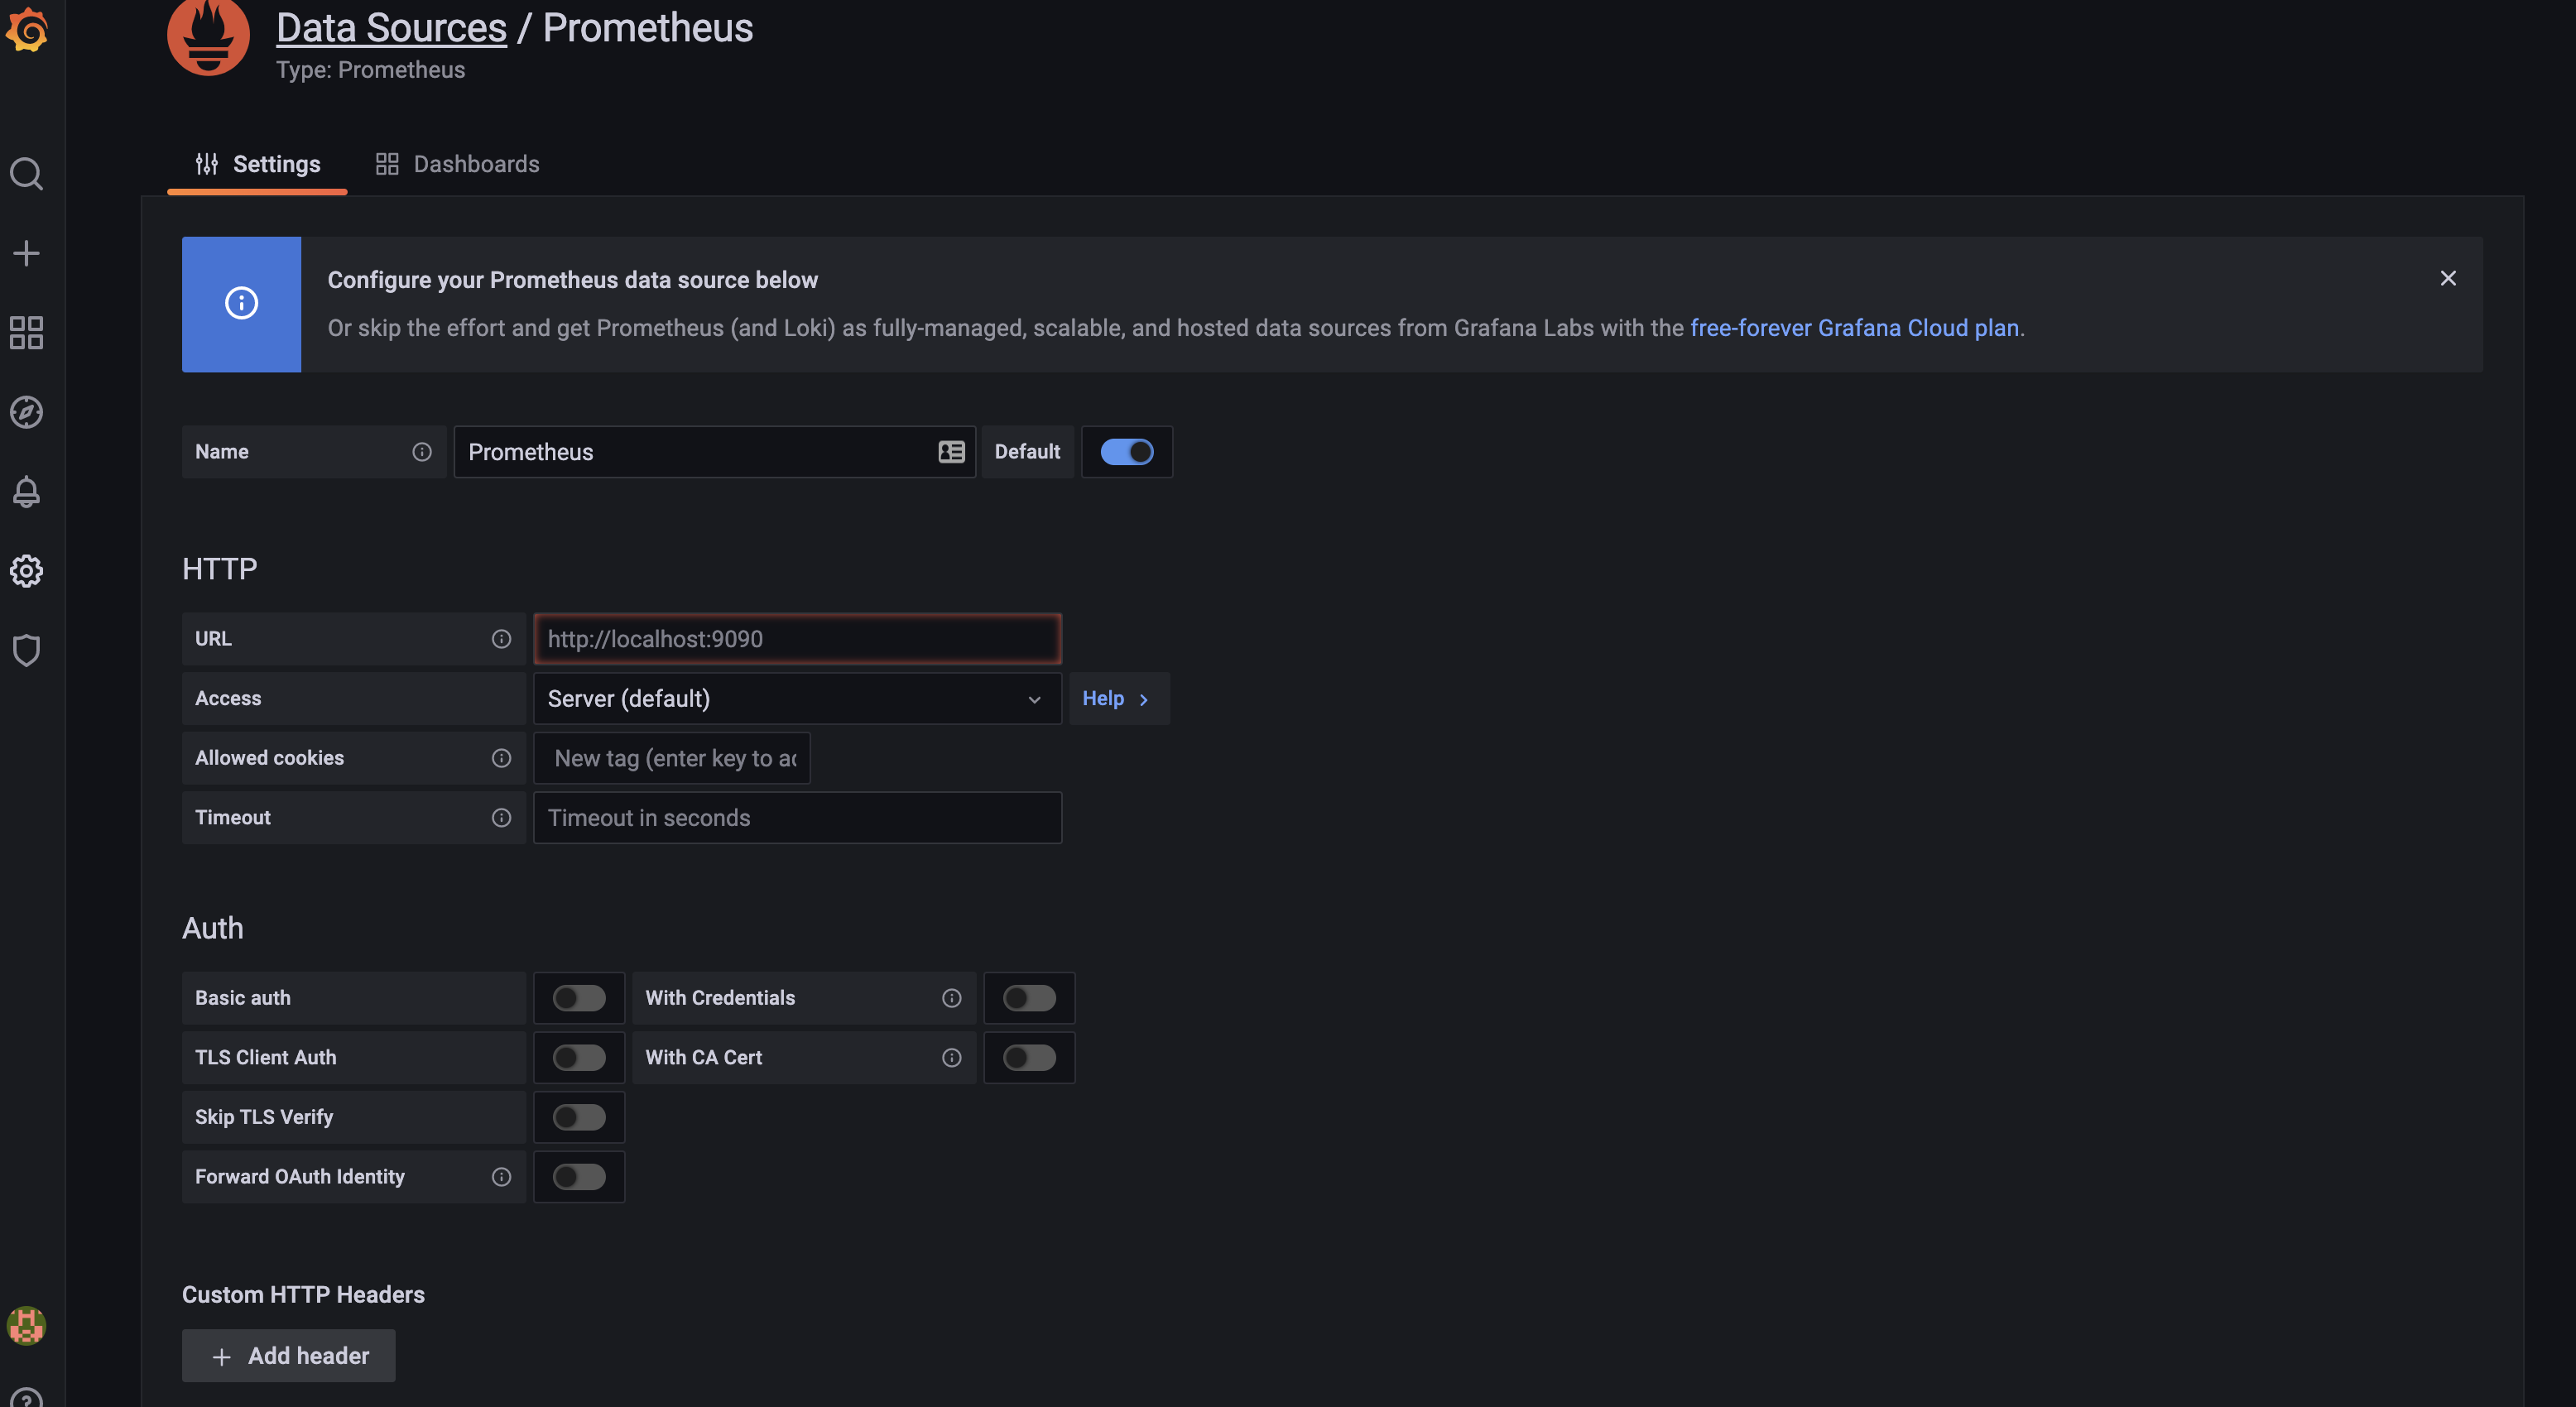 Screencapture showing the configuration settings for the Prometheus data source in Grafana